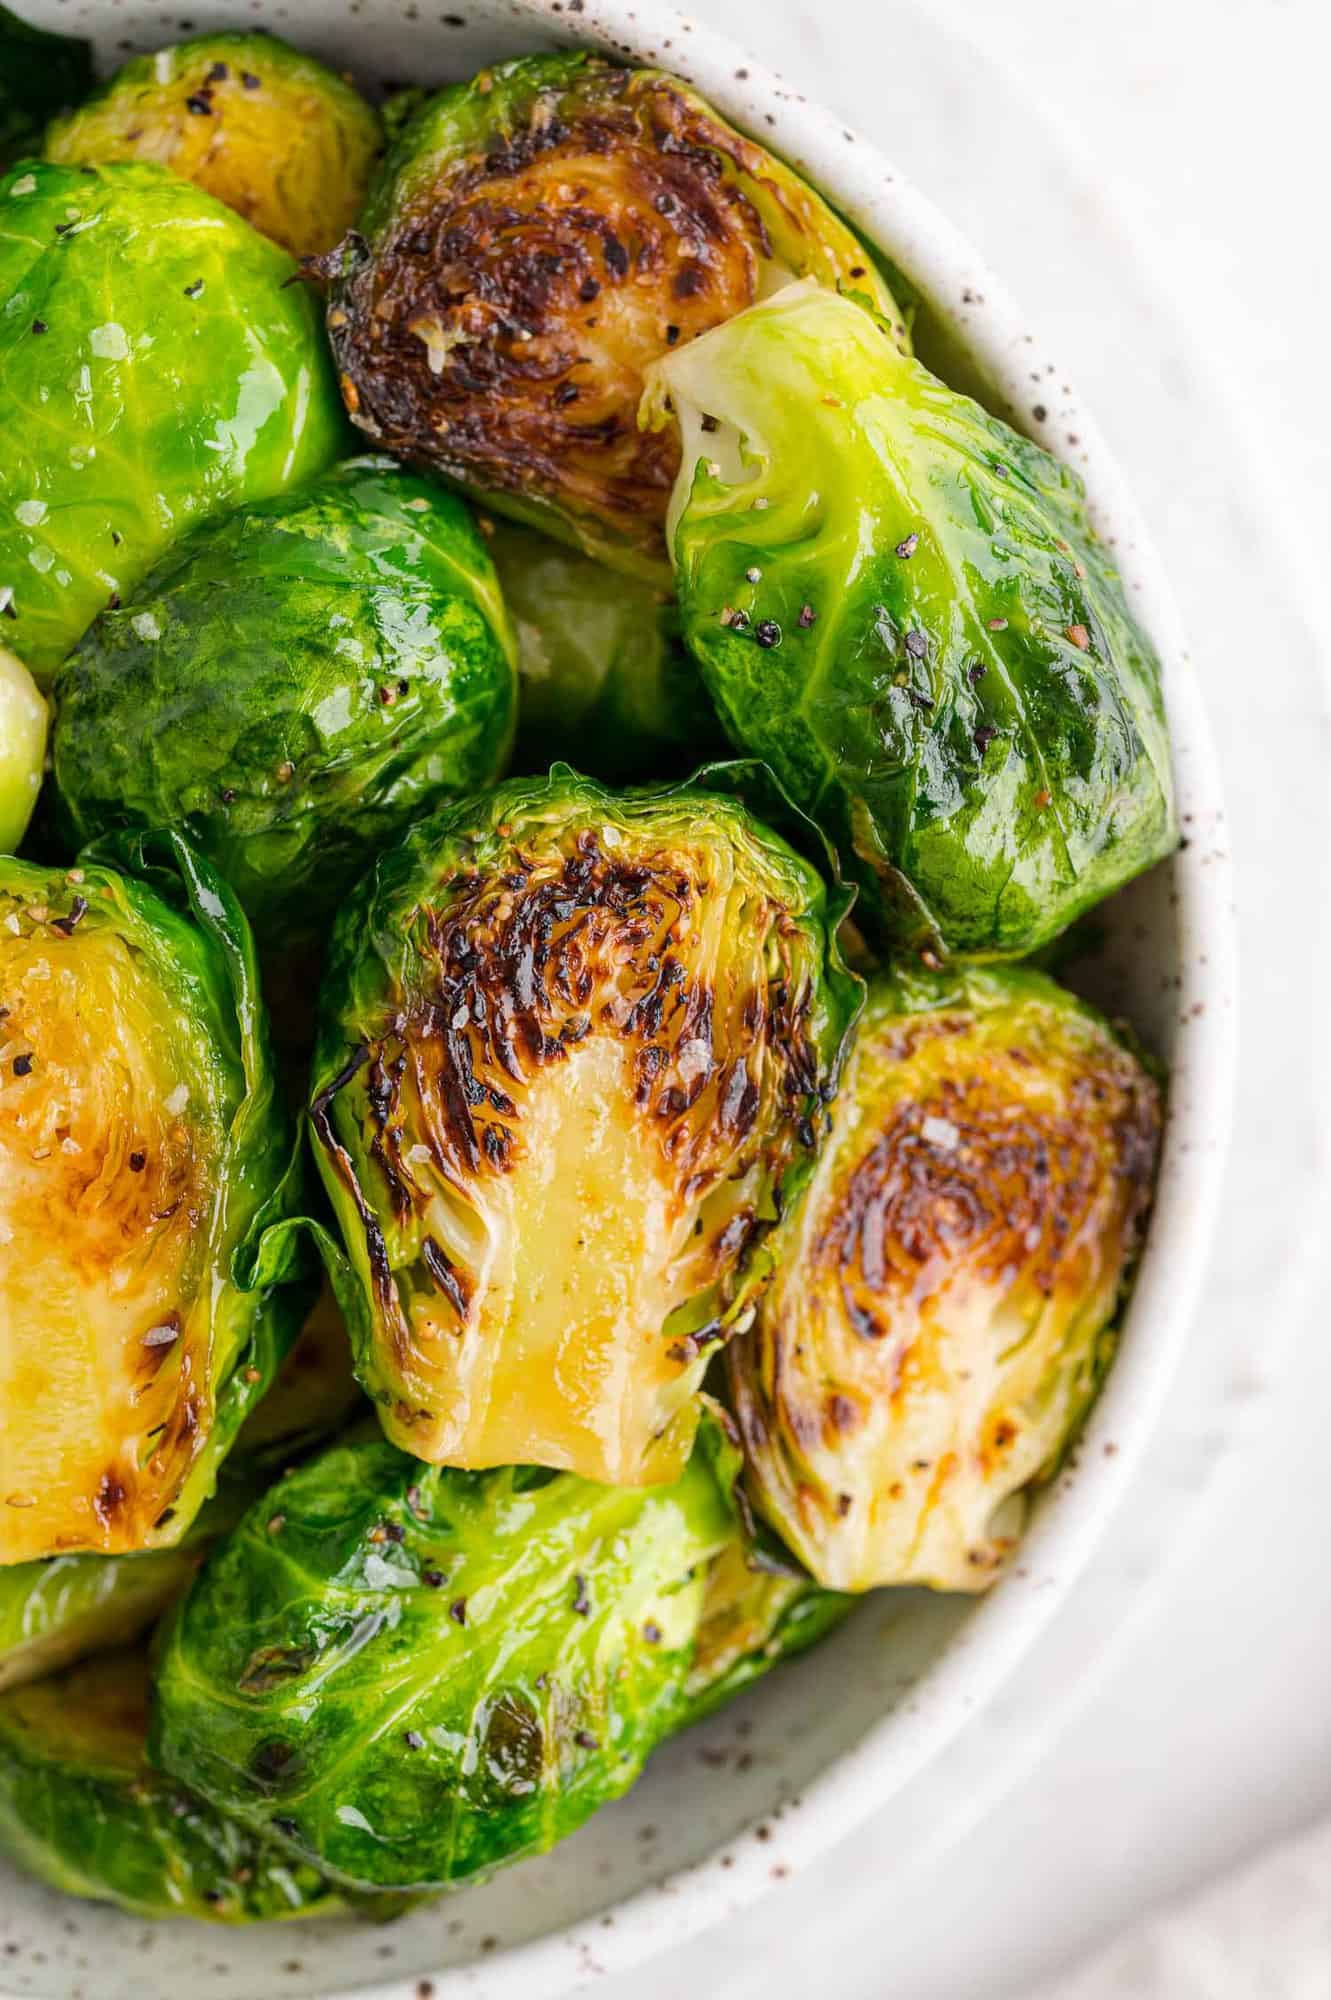 Cooked Brussels sprouts in a bowl.